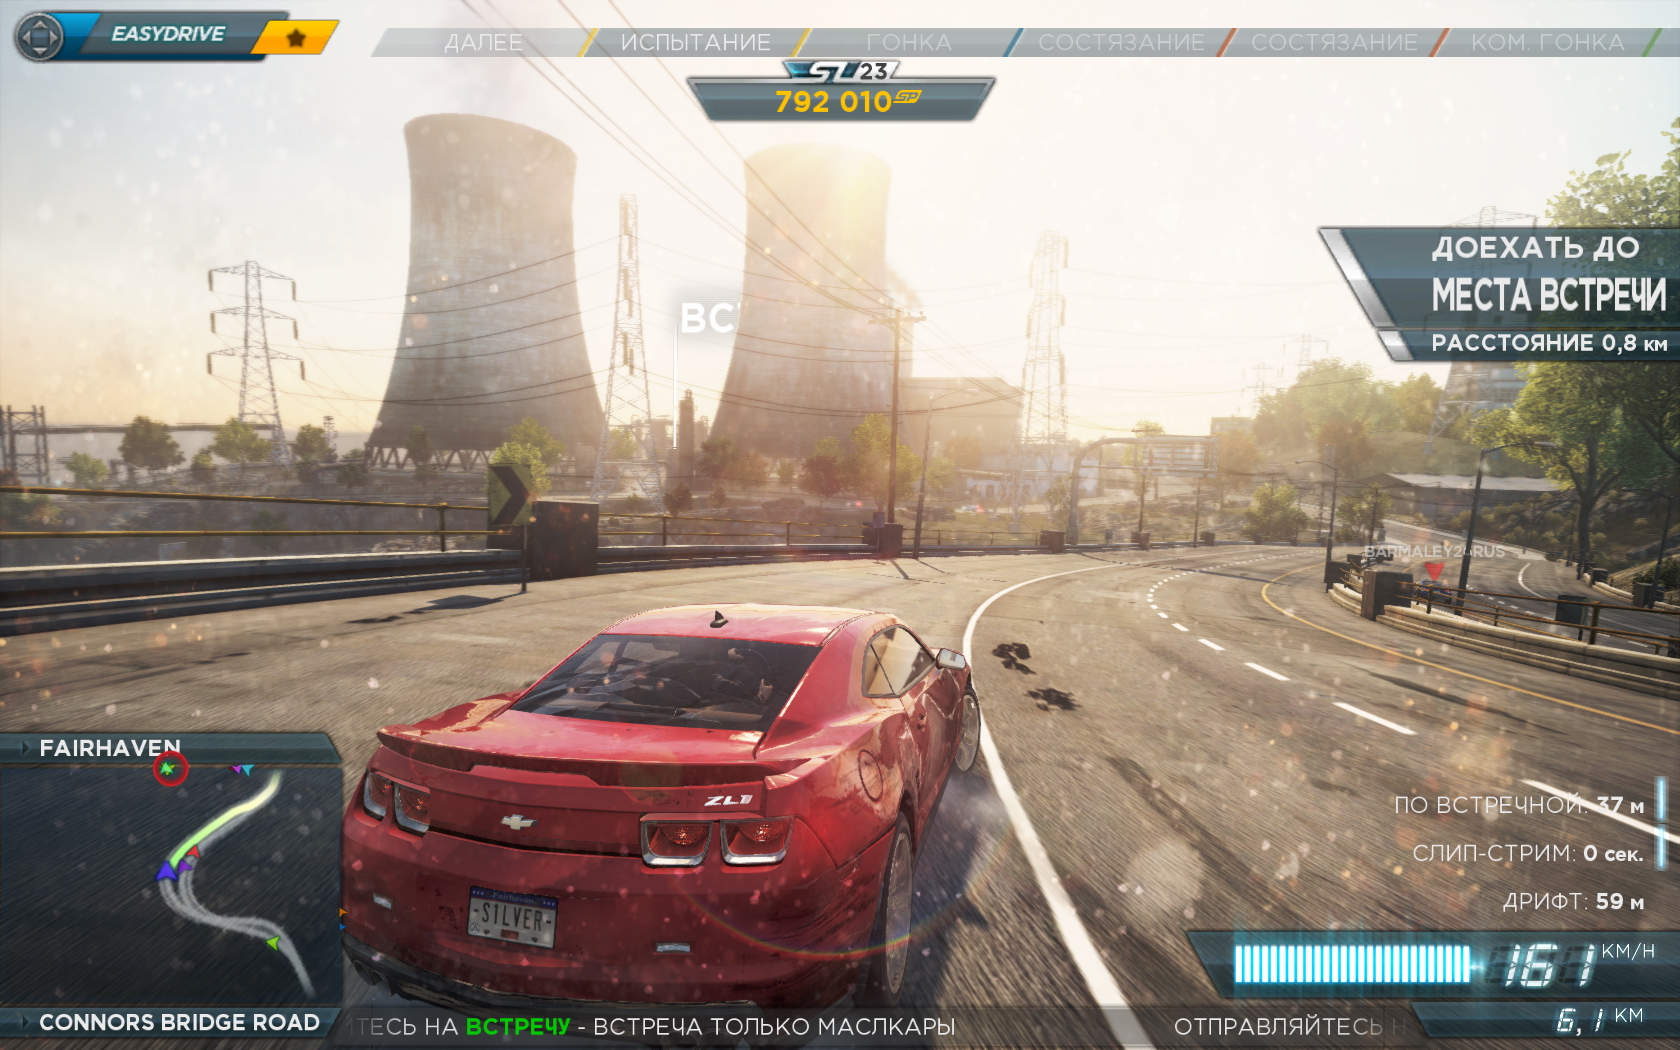 Nfs Most Wanted 2012 Save Games For Pc Free Download